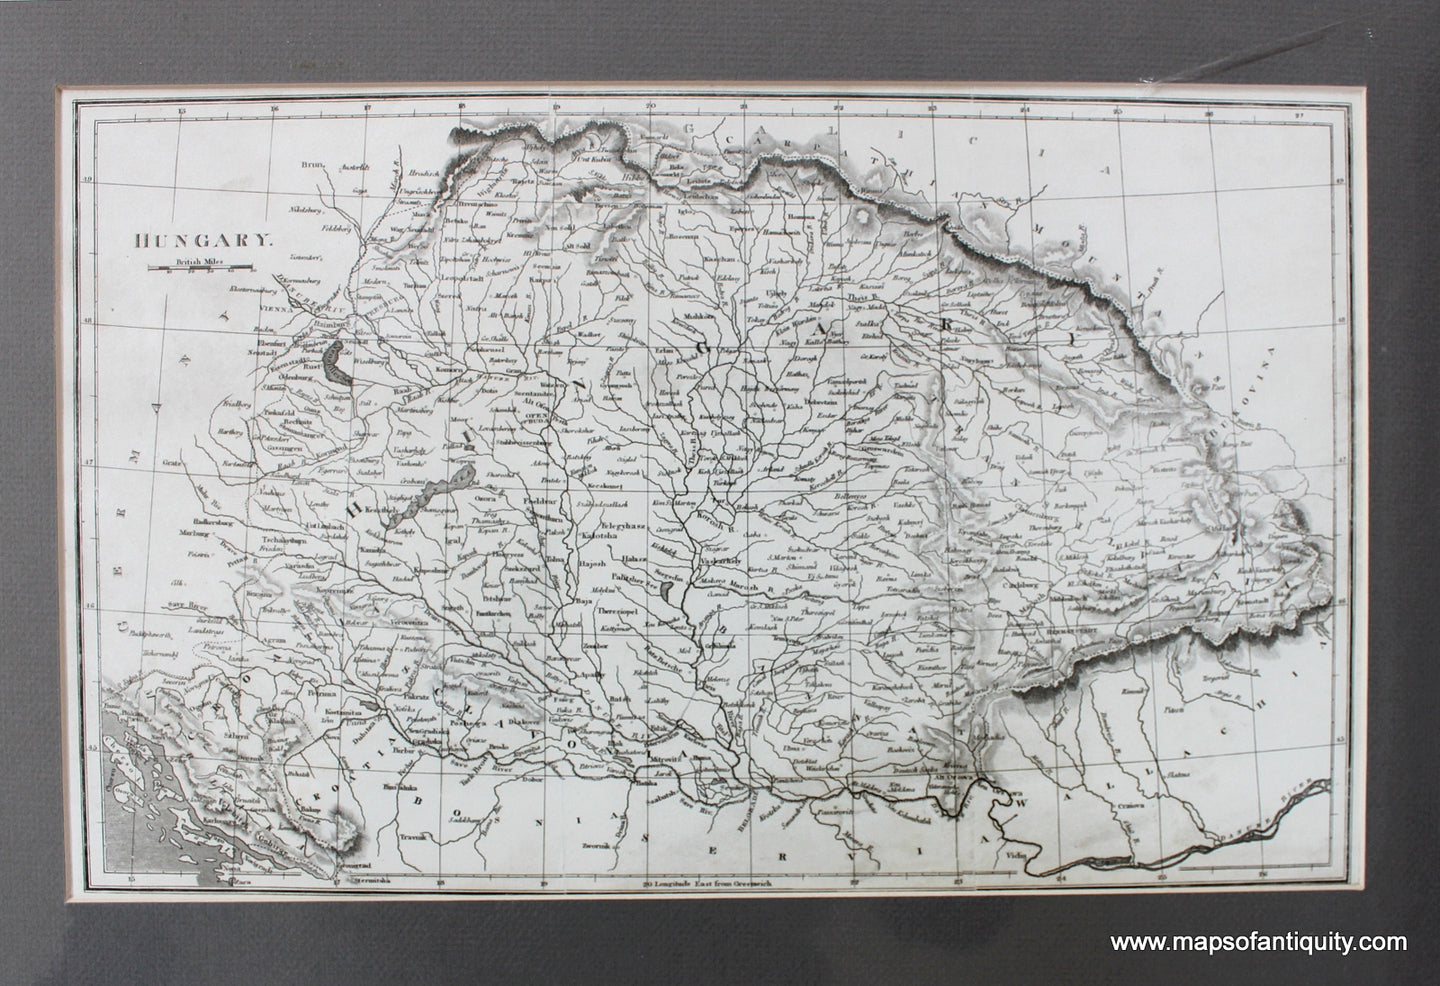 Black-and-White-Antique-Map-Hungary.**********-Hungary--1806-Abraham-Rees-Maps-Of-Antiquity